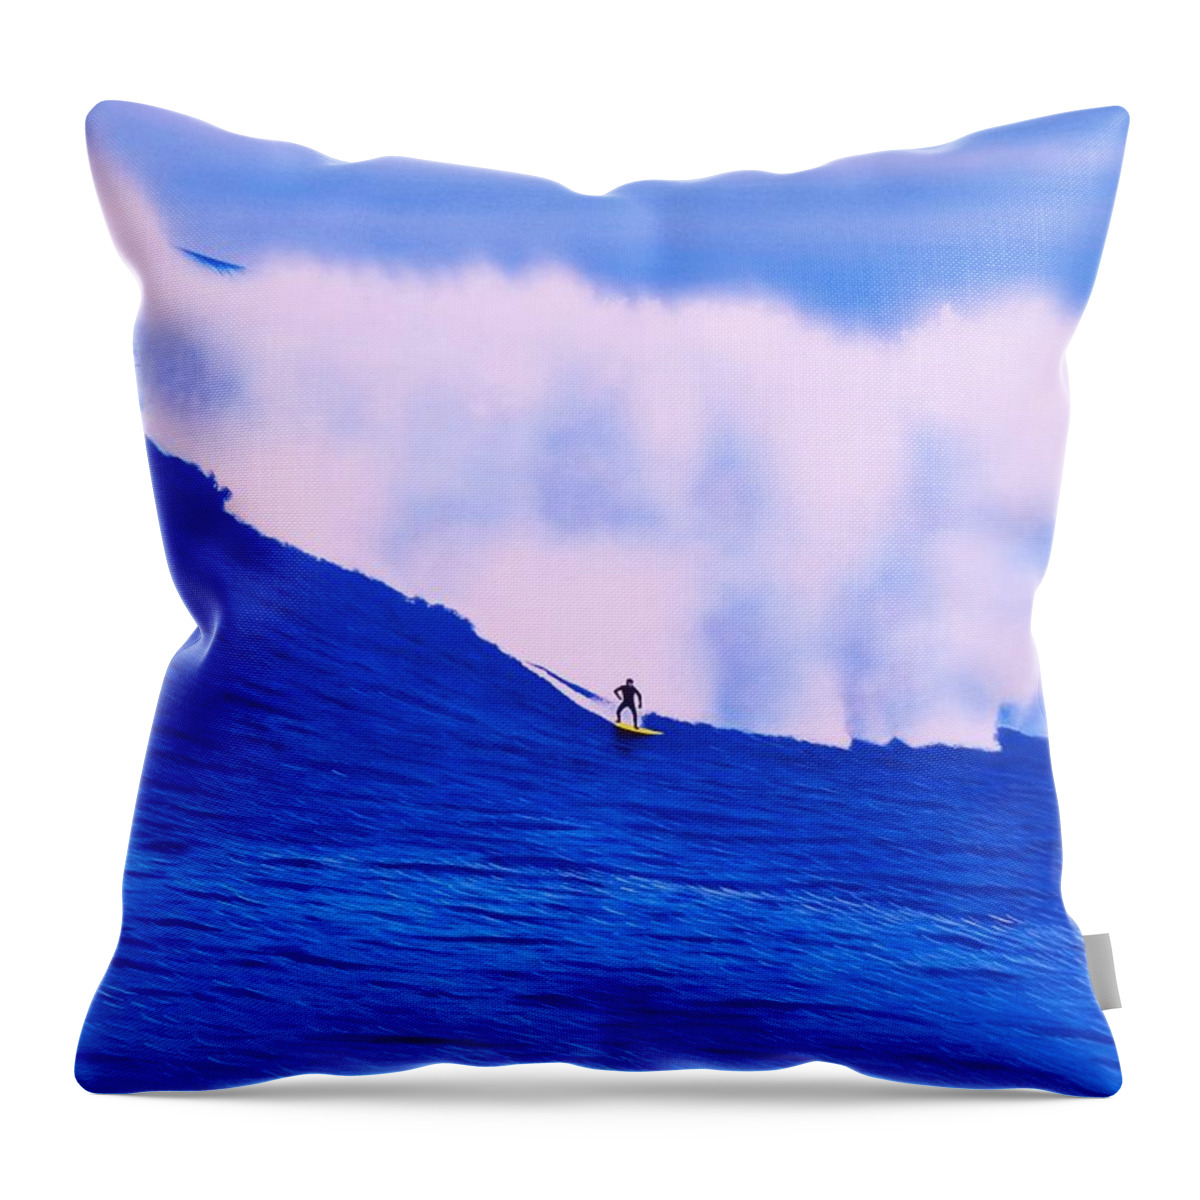 Surfing Throw Pillow featuring the painting Cortes Bank 2012 by John Kaelin